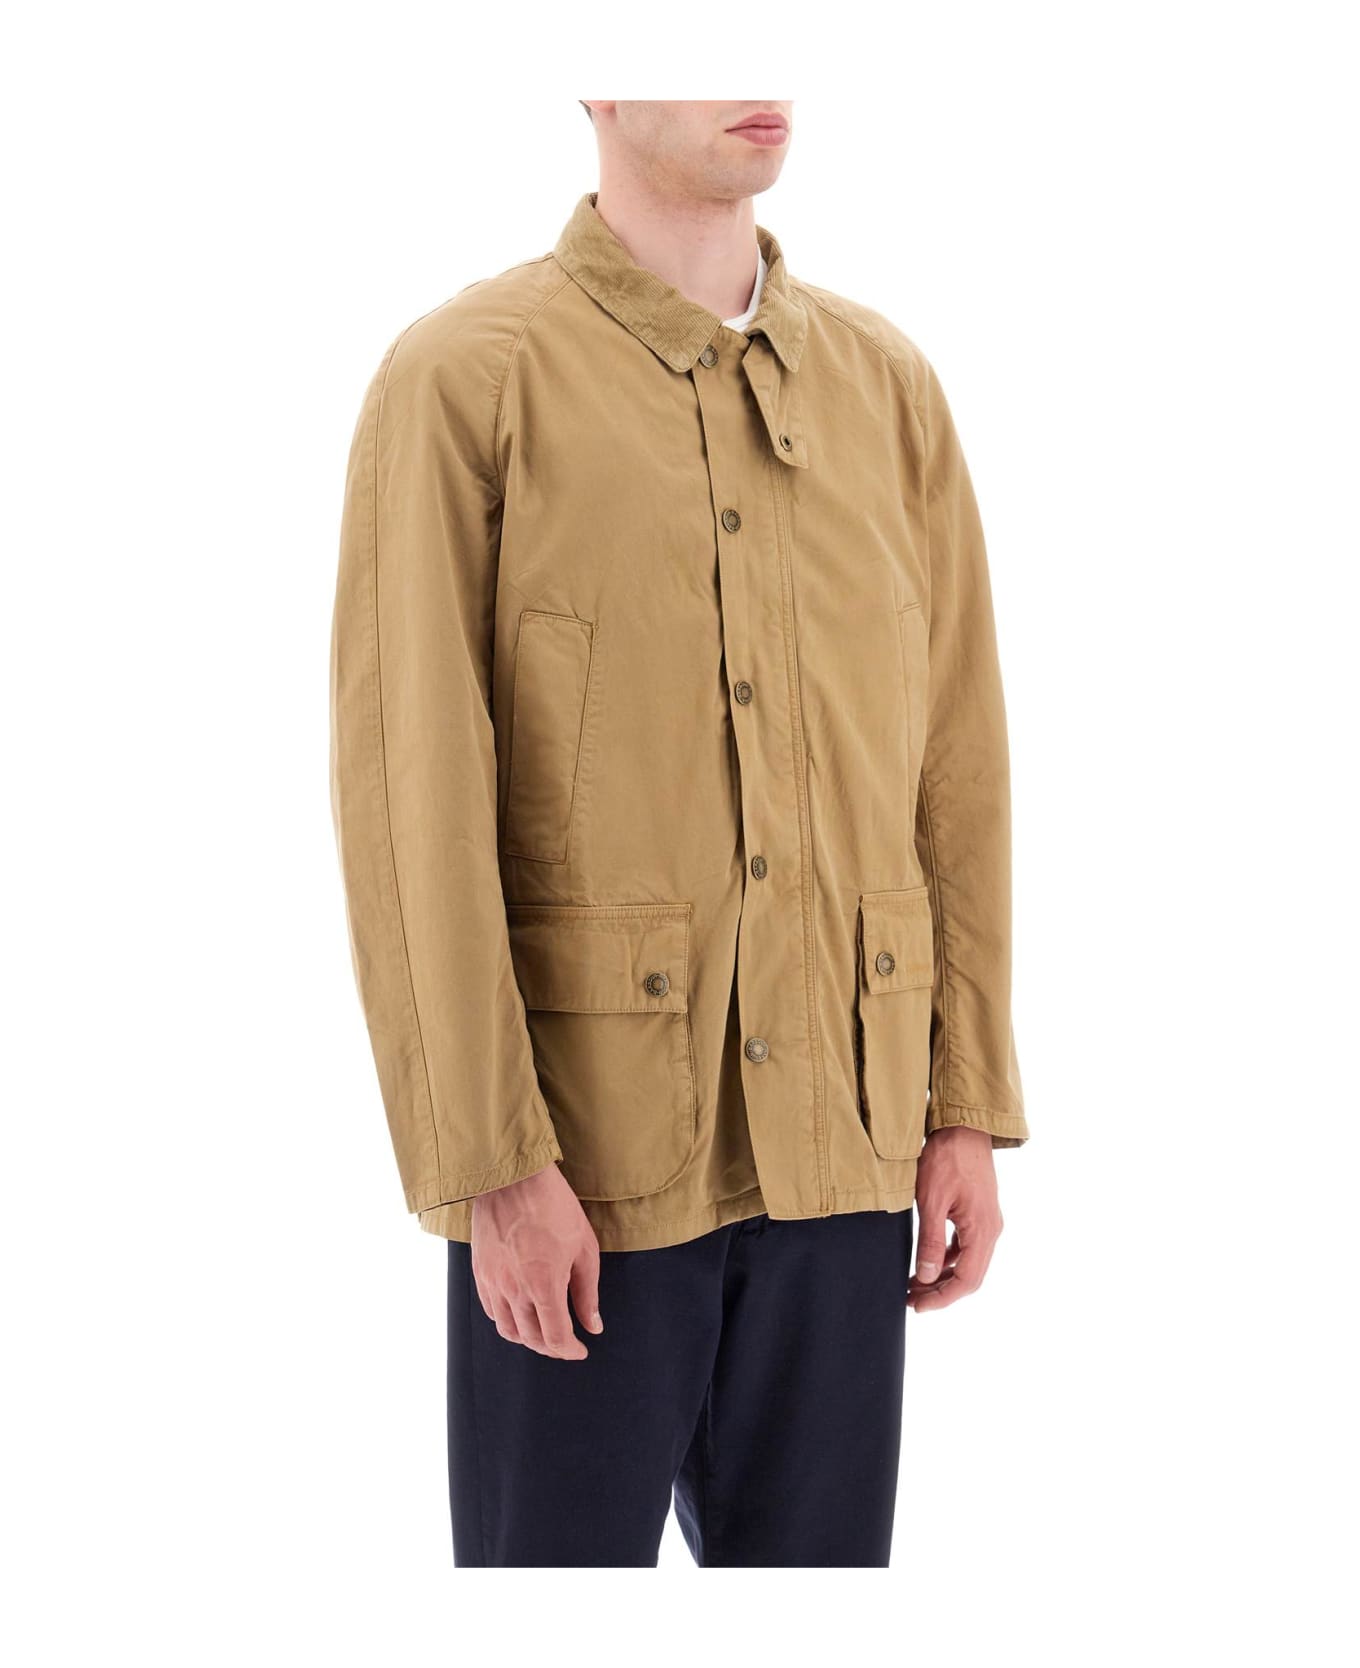 Barbour Ashby Casual Cotton Jacket - Beige